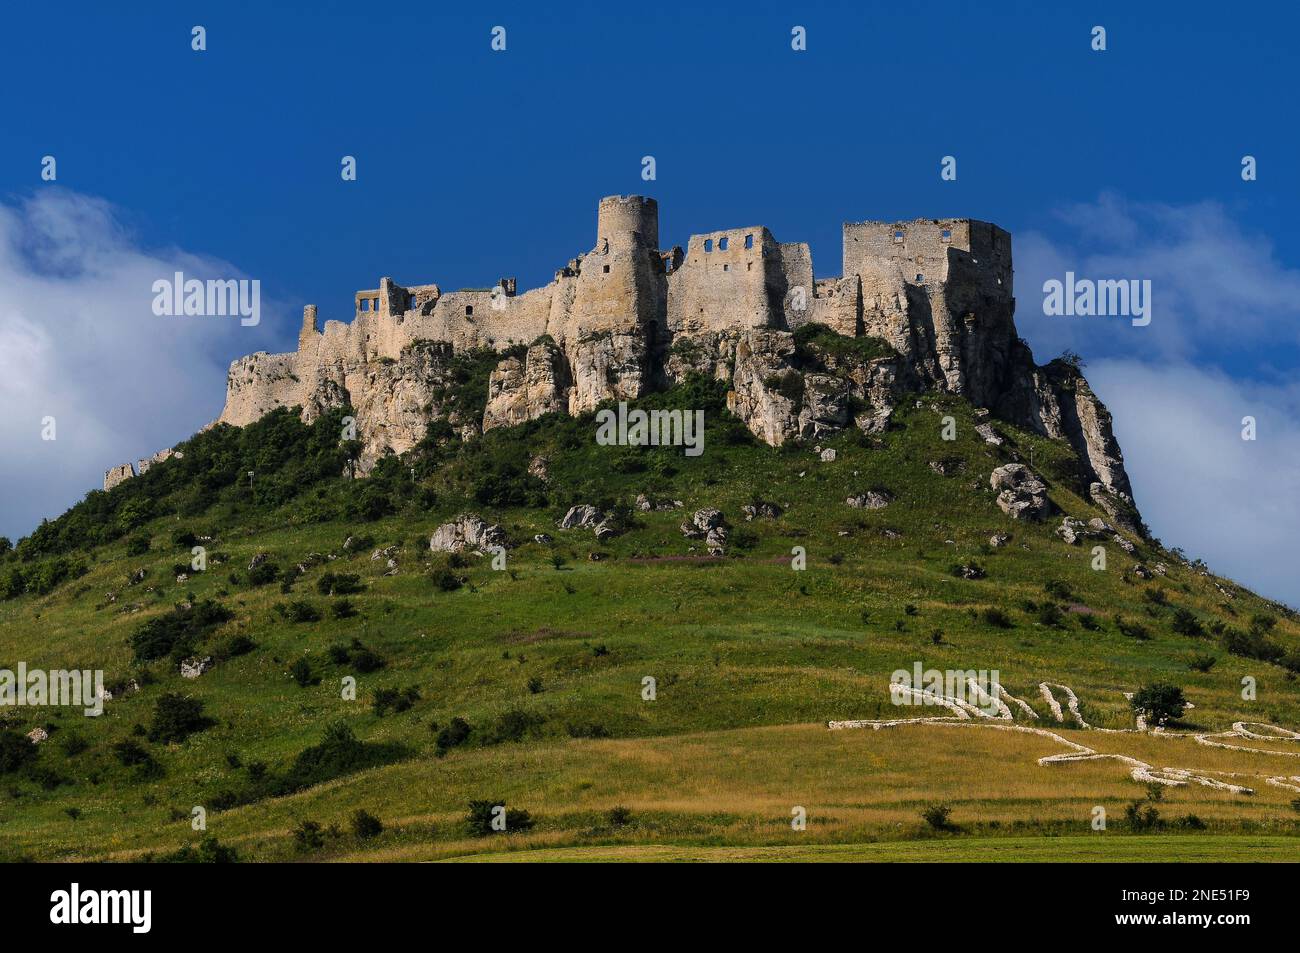 Spiš Castle, a mighty medieval fortress built by the Hungarian kings, stands on a 200m-high limestone spur in the Košice Region of eastern Slovakia above ‘Sacred’, a 2008 geoglyph or land art installation by Australian sculptor Andrew Rogers inspired by a horse depicted on an ancient Celtic coin found within the castle ruins. Stock Photo